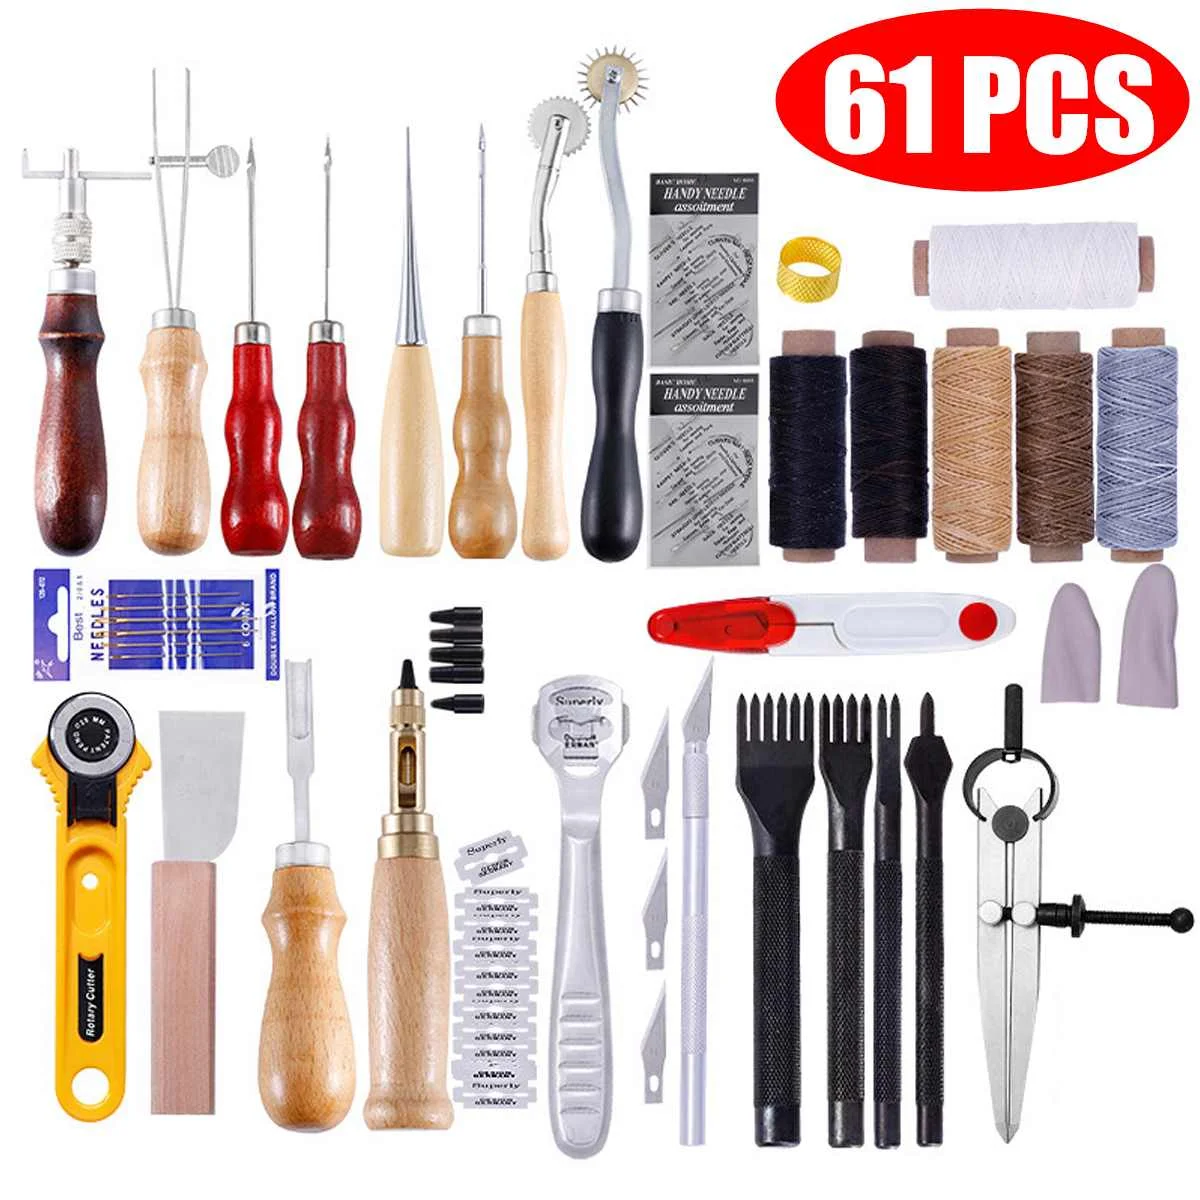 

61 Pcs/Set Professional Leather Craft Tools Kit Home Hand Sewing Stitching Punch Carving Work Saddle Leathercraft Accessories